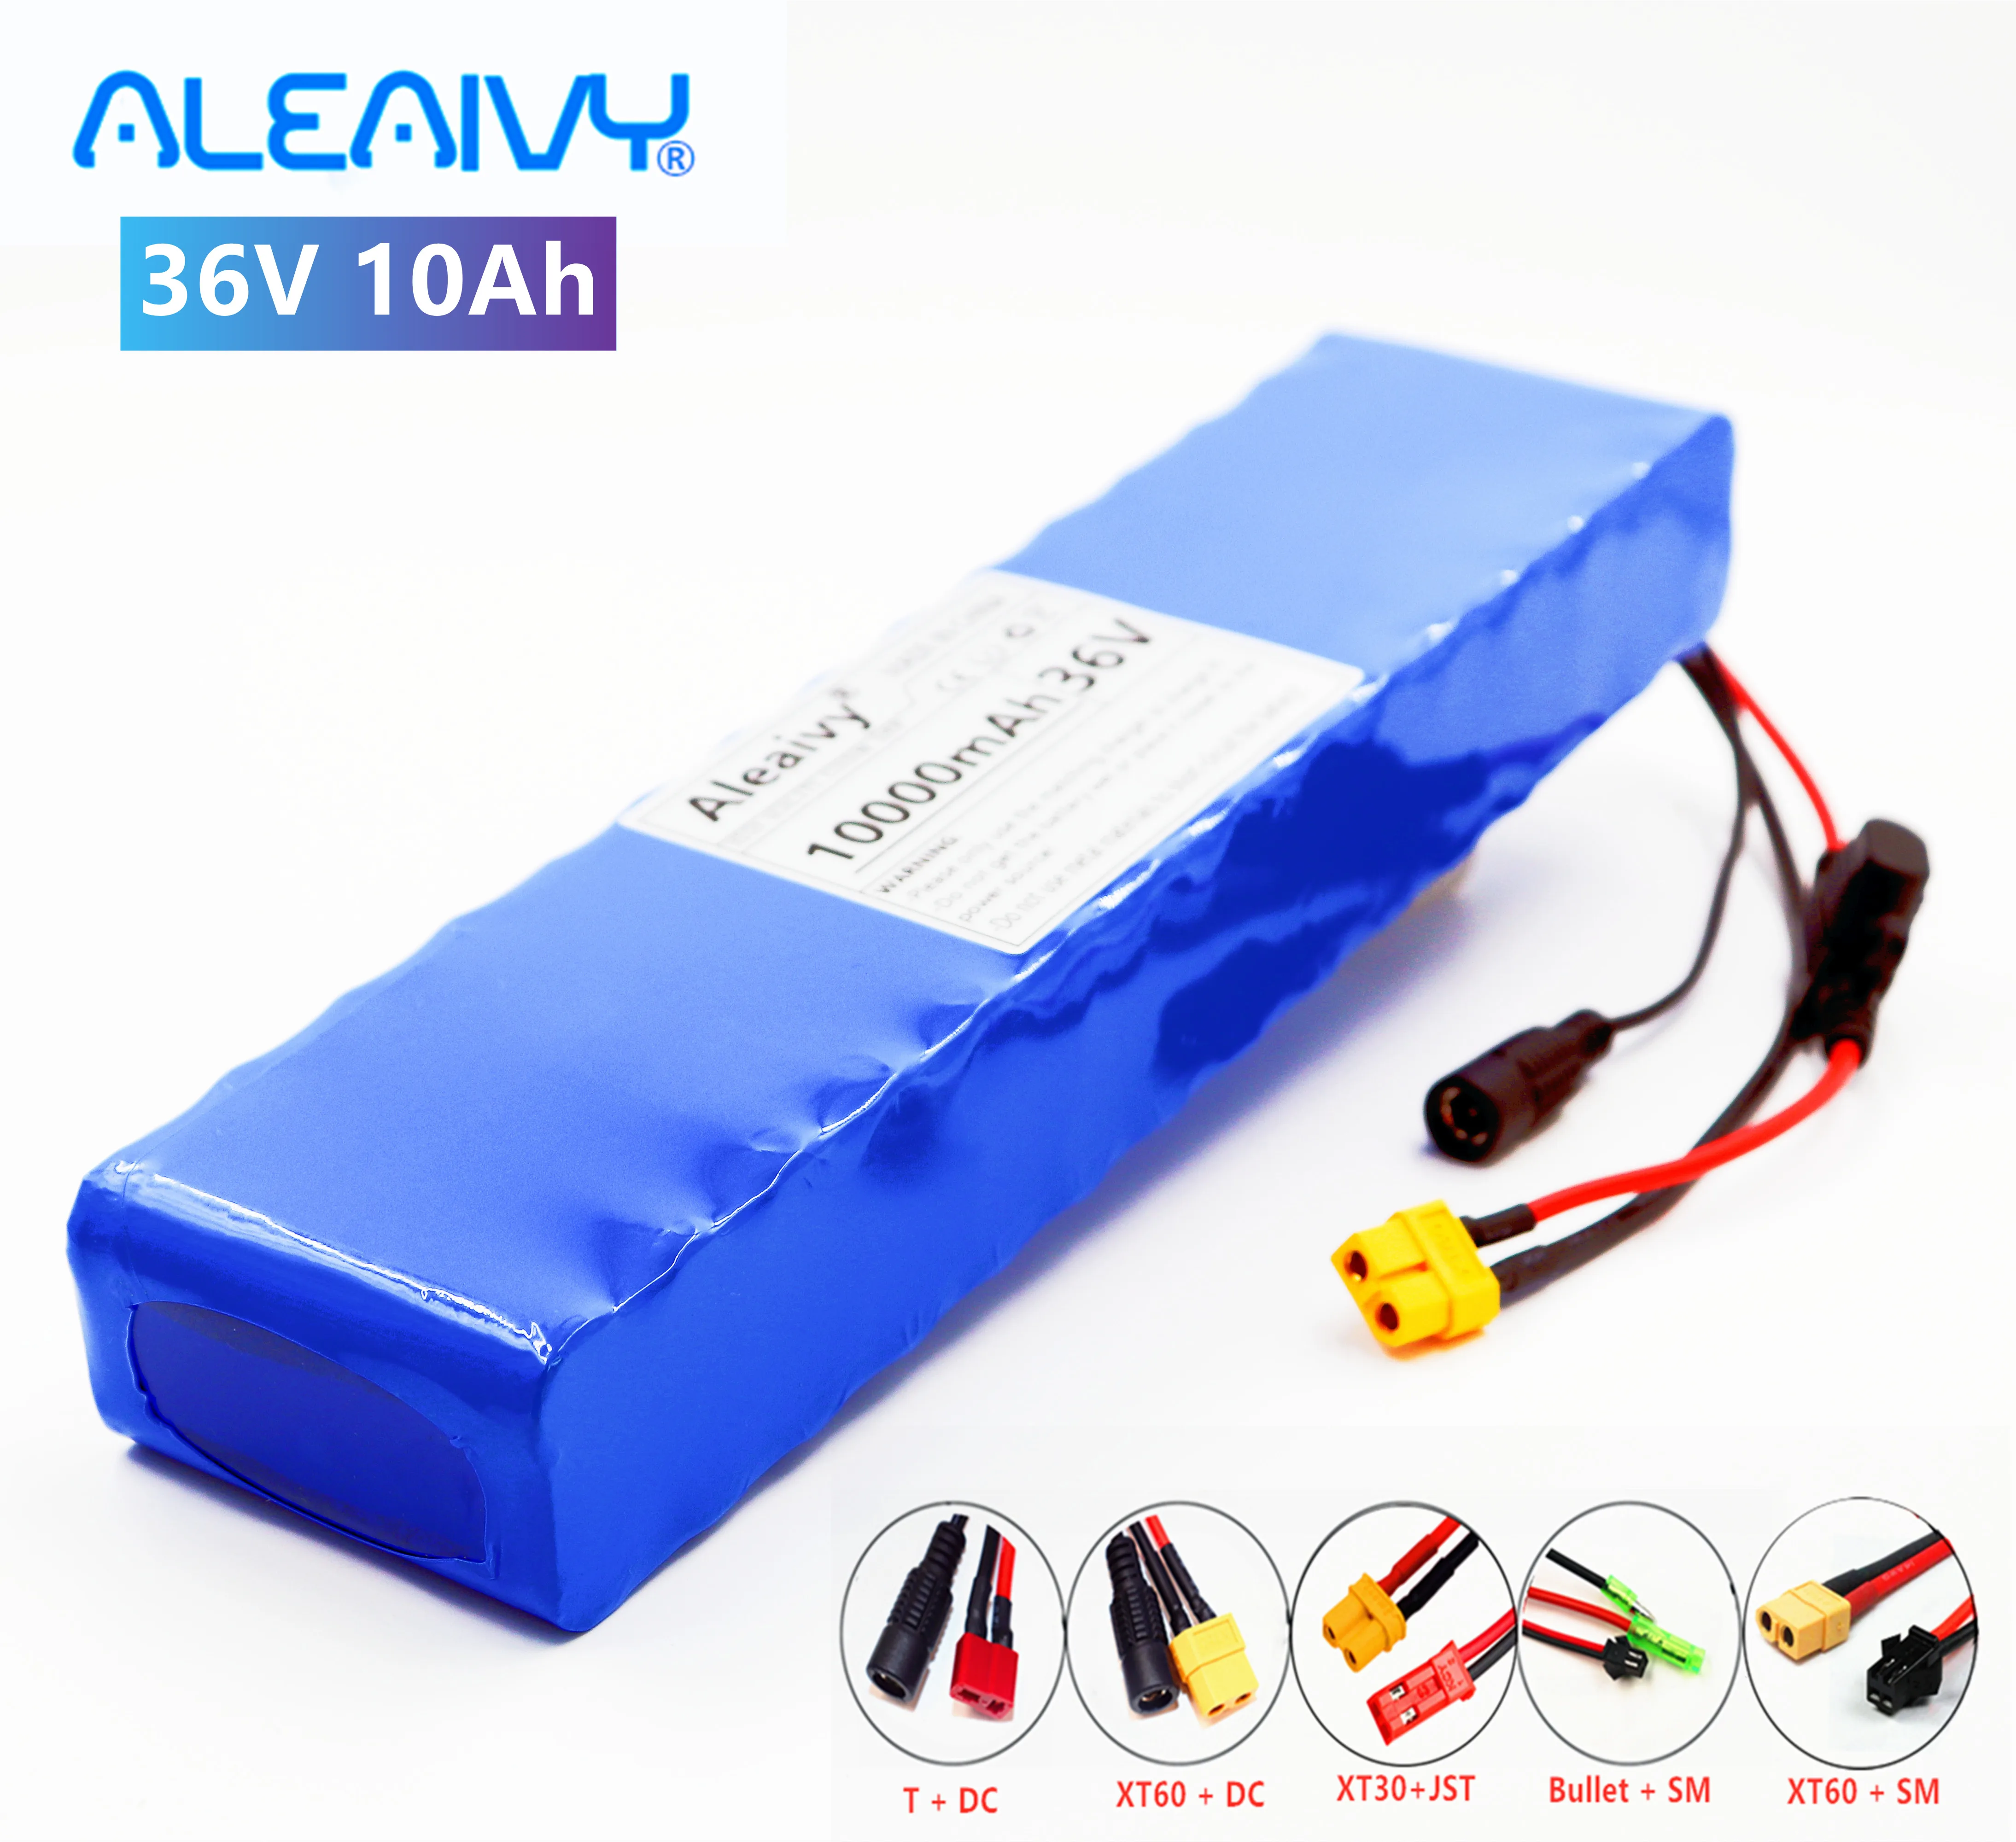 

36V10Ah 18650 Lithium Battery Pack 10S3P 600W or Less, Suitable for Scooter E-Twow Scooter M365 Pro Ebike Backup Power Supply